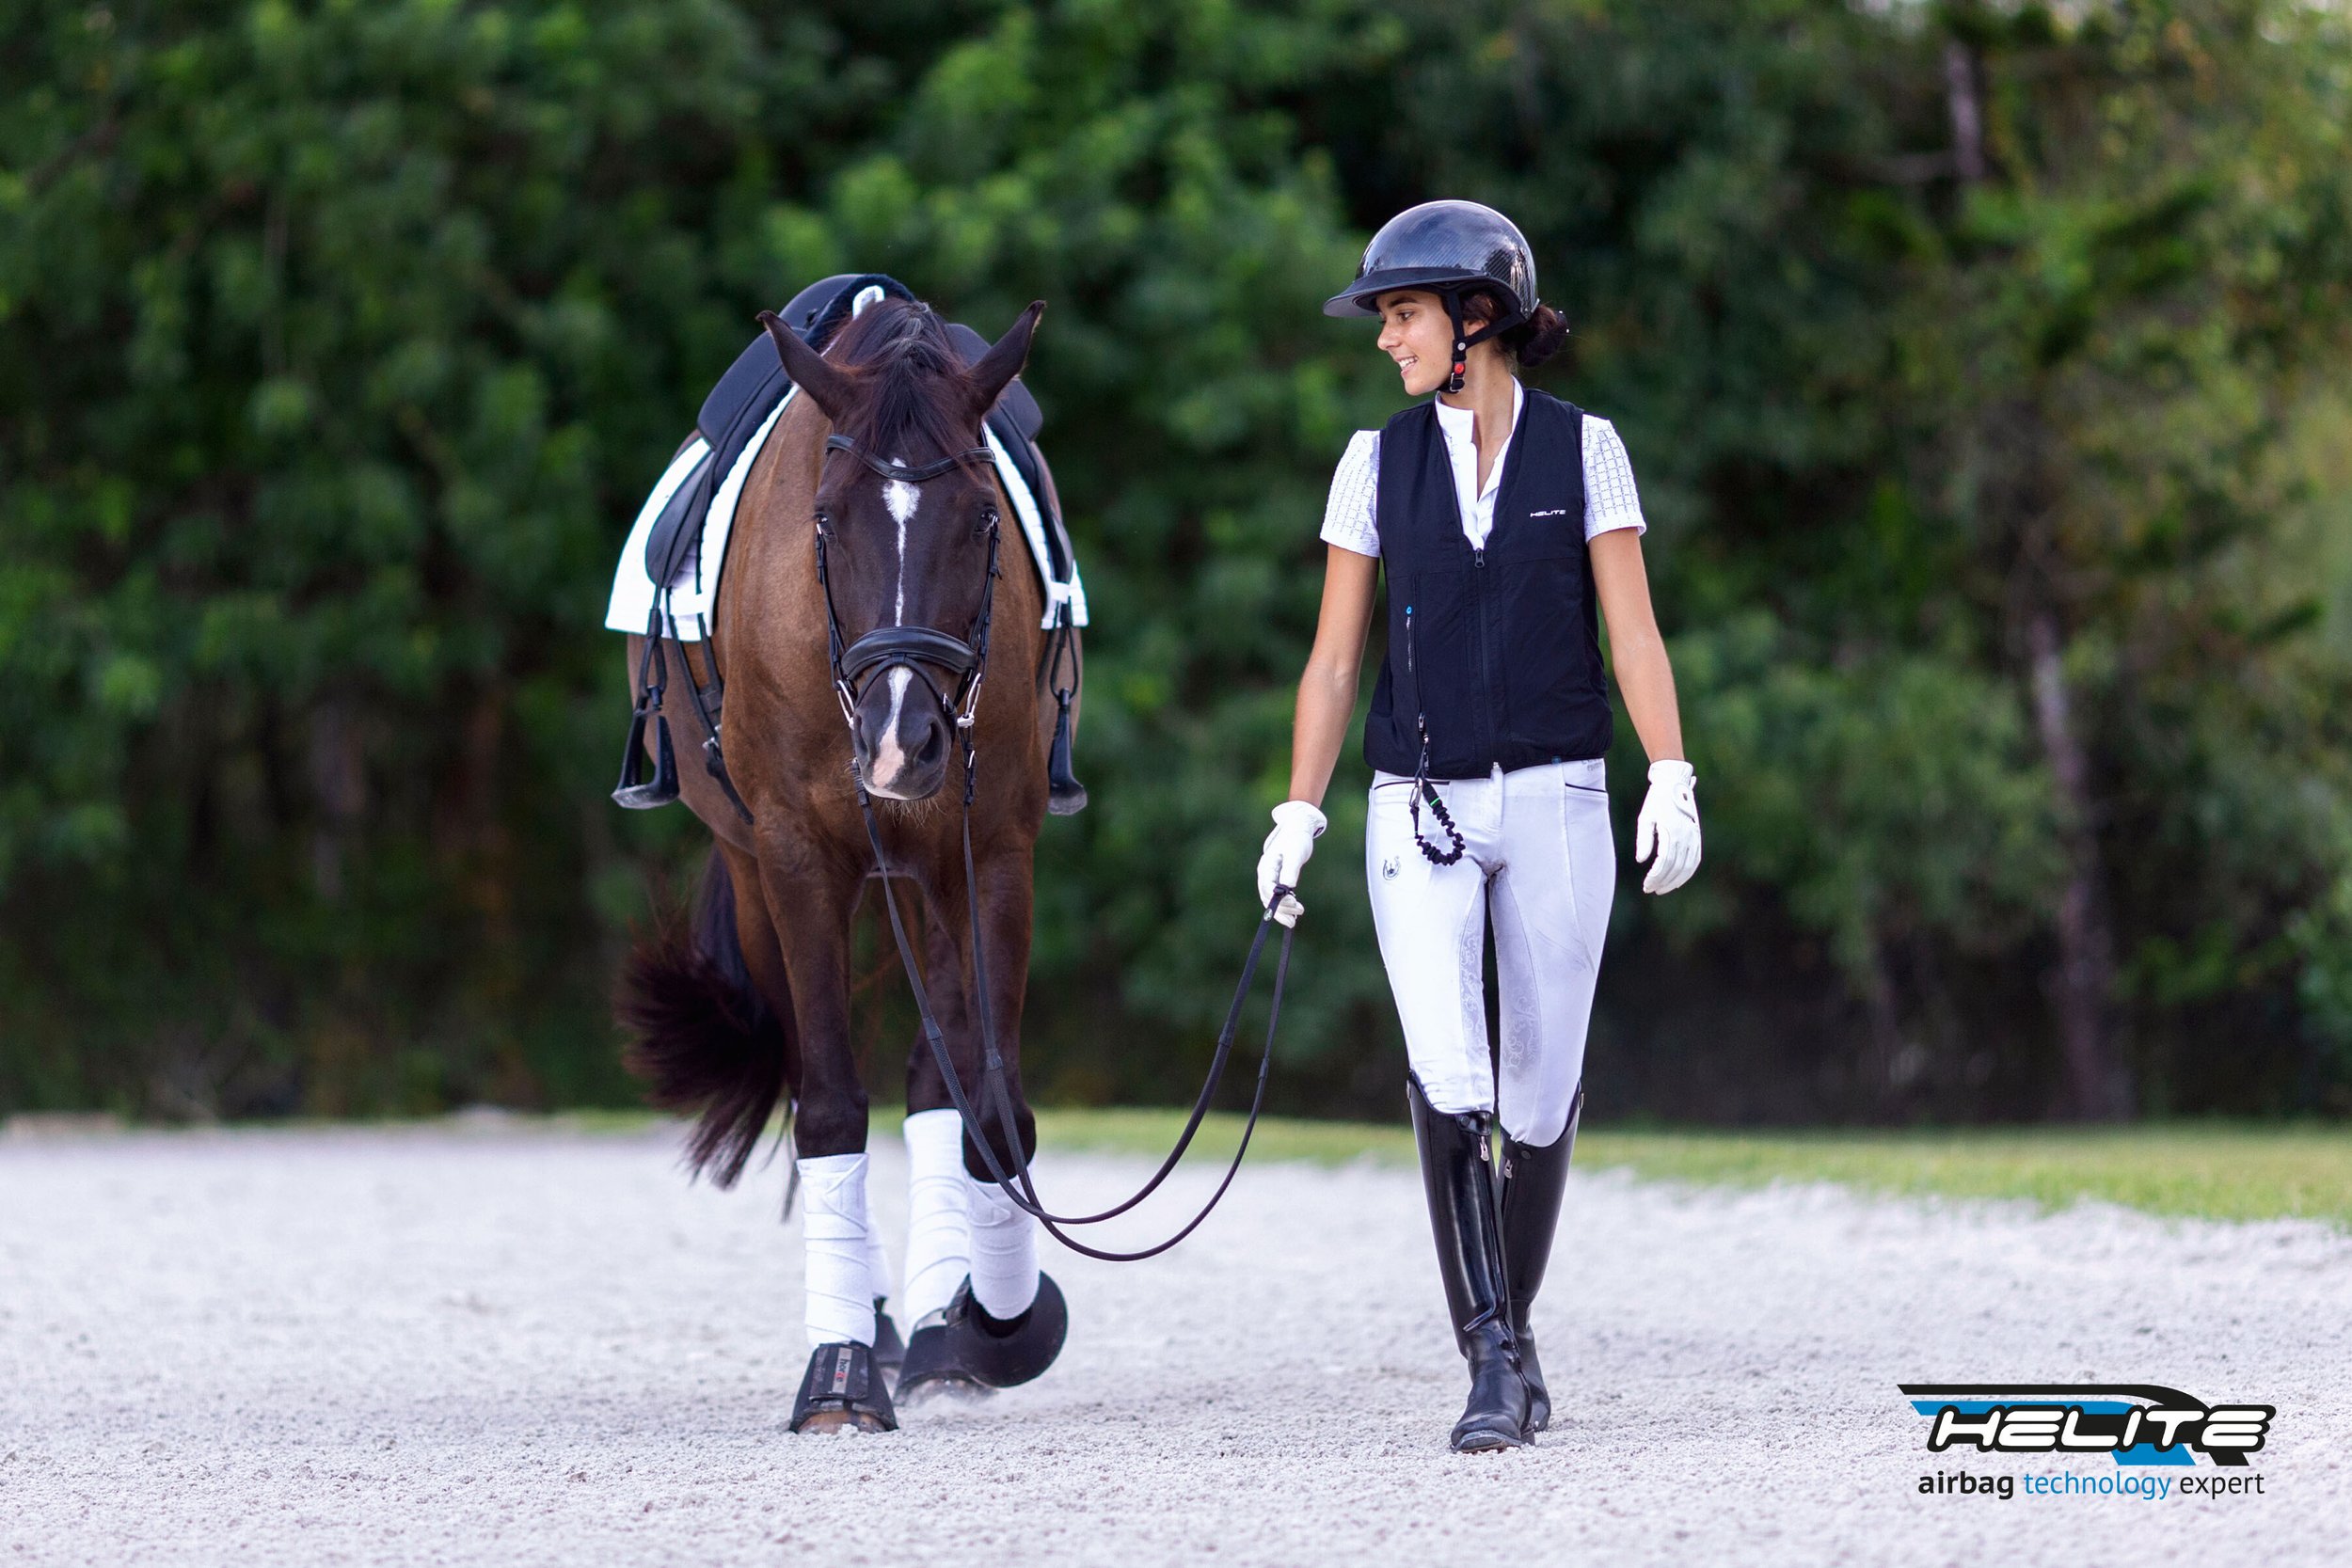 Helite airbags for equestrians